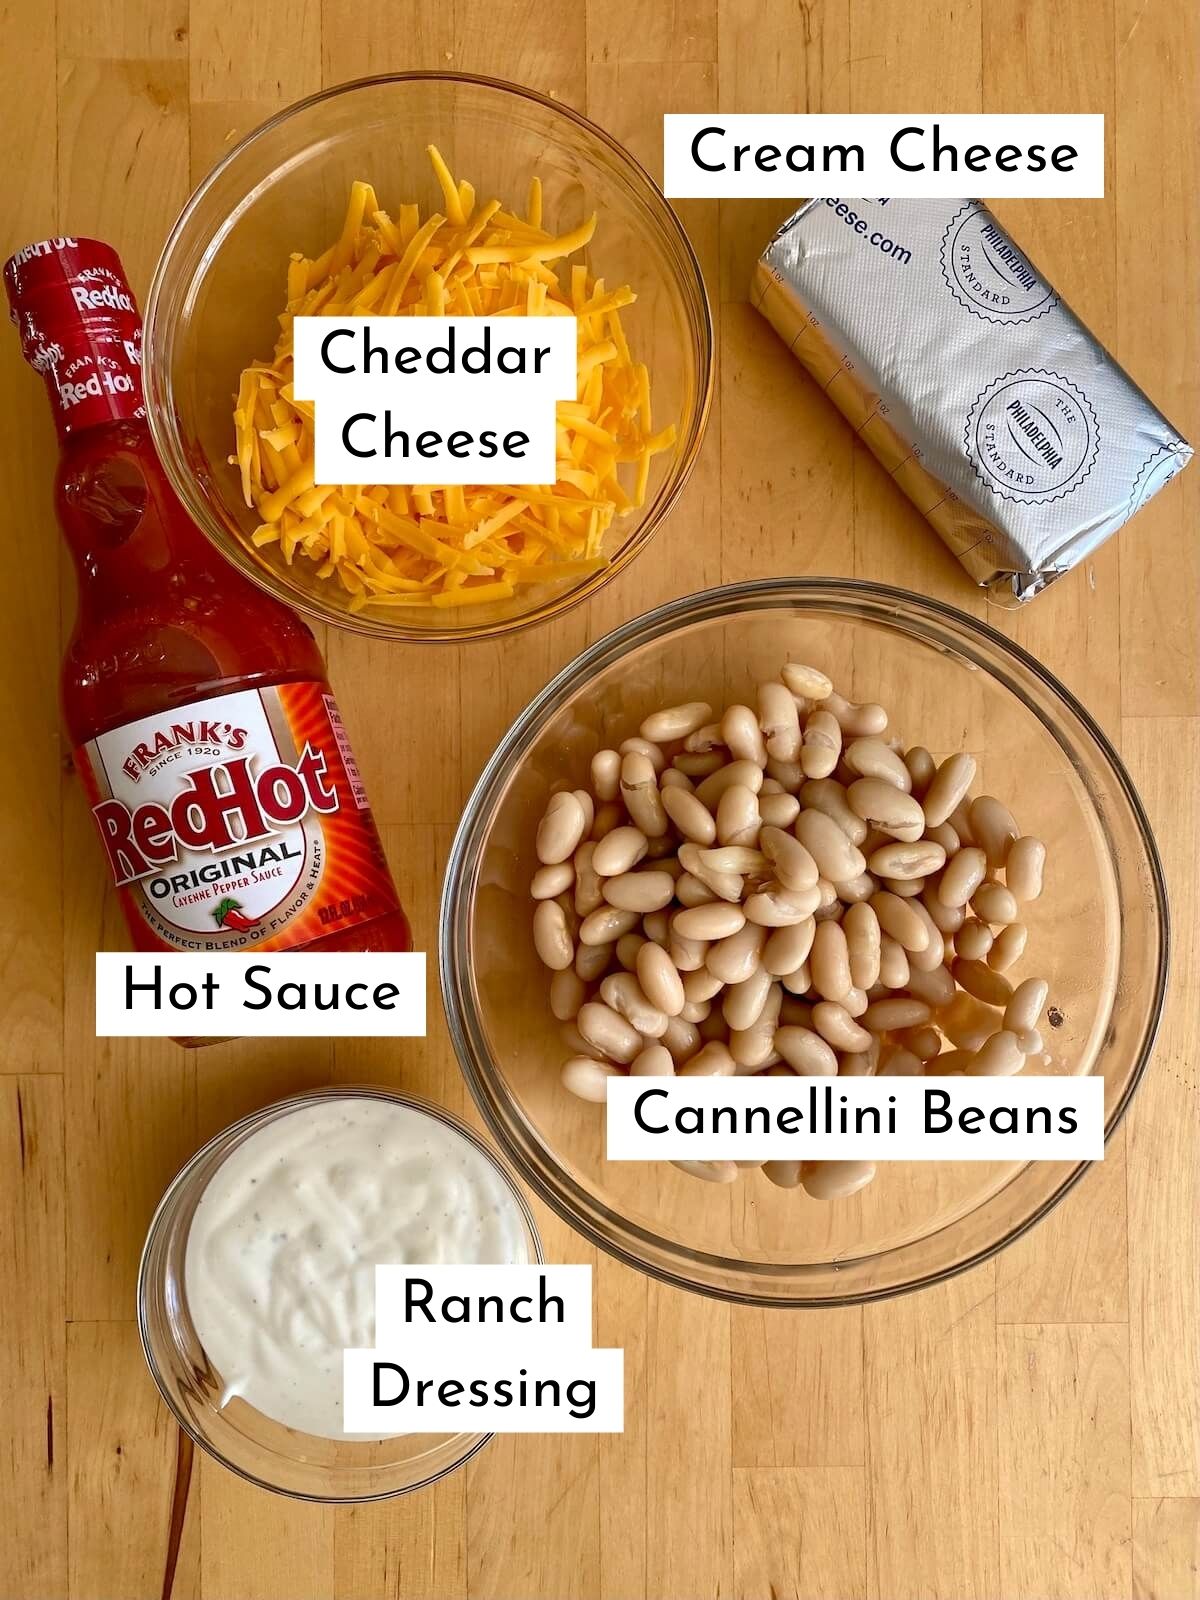 The ingredients to make buffalo white bean dip on a butcher block countertop. The ingredients have text over them that state what each ingredient is. The ingredients include cannellini beans, cream cheese, cheddar cheese, hot sauce, and ranch dressing.